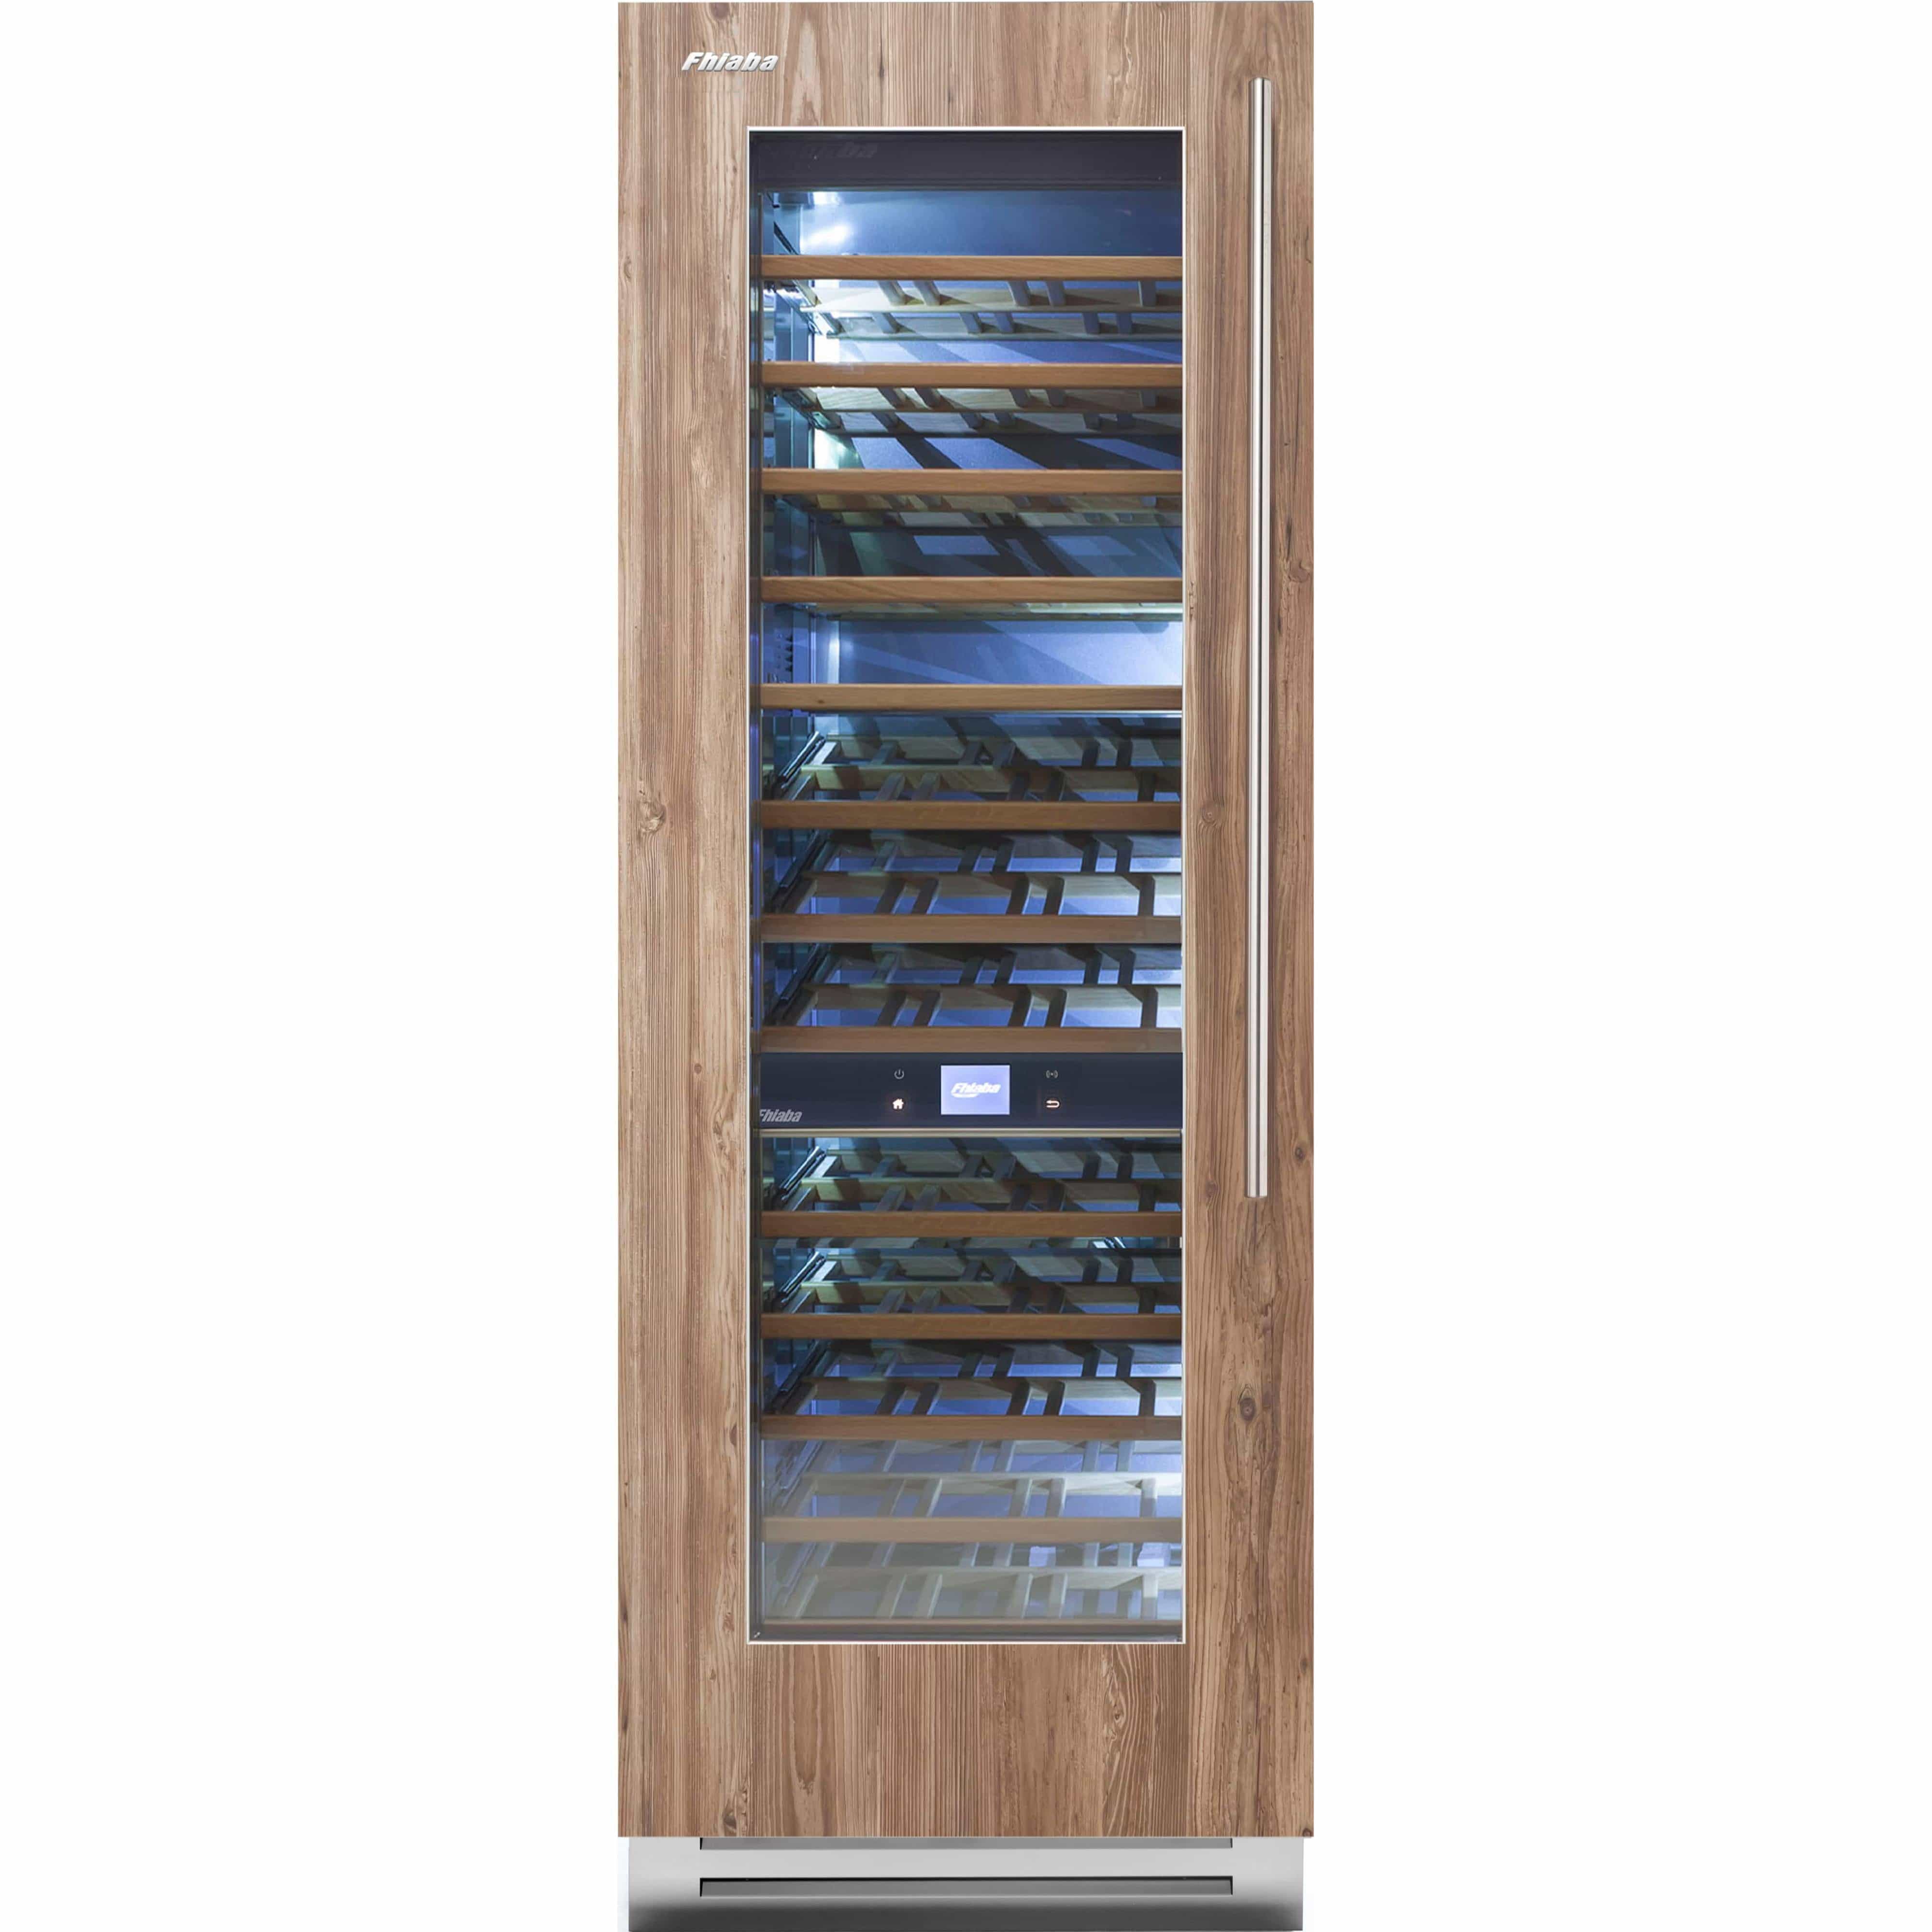 Fhiaba 117-Bottle Integrated Series Wine Cellar with Smart Touch TFT Display FI30WCC-LO2 Wine Storage FI30WCCLO2 Luxury Appliances Direct